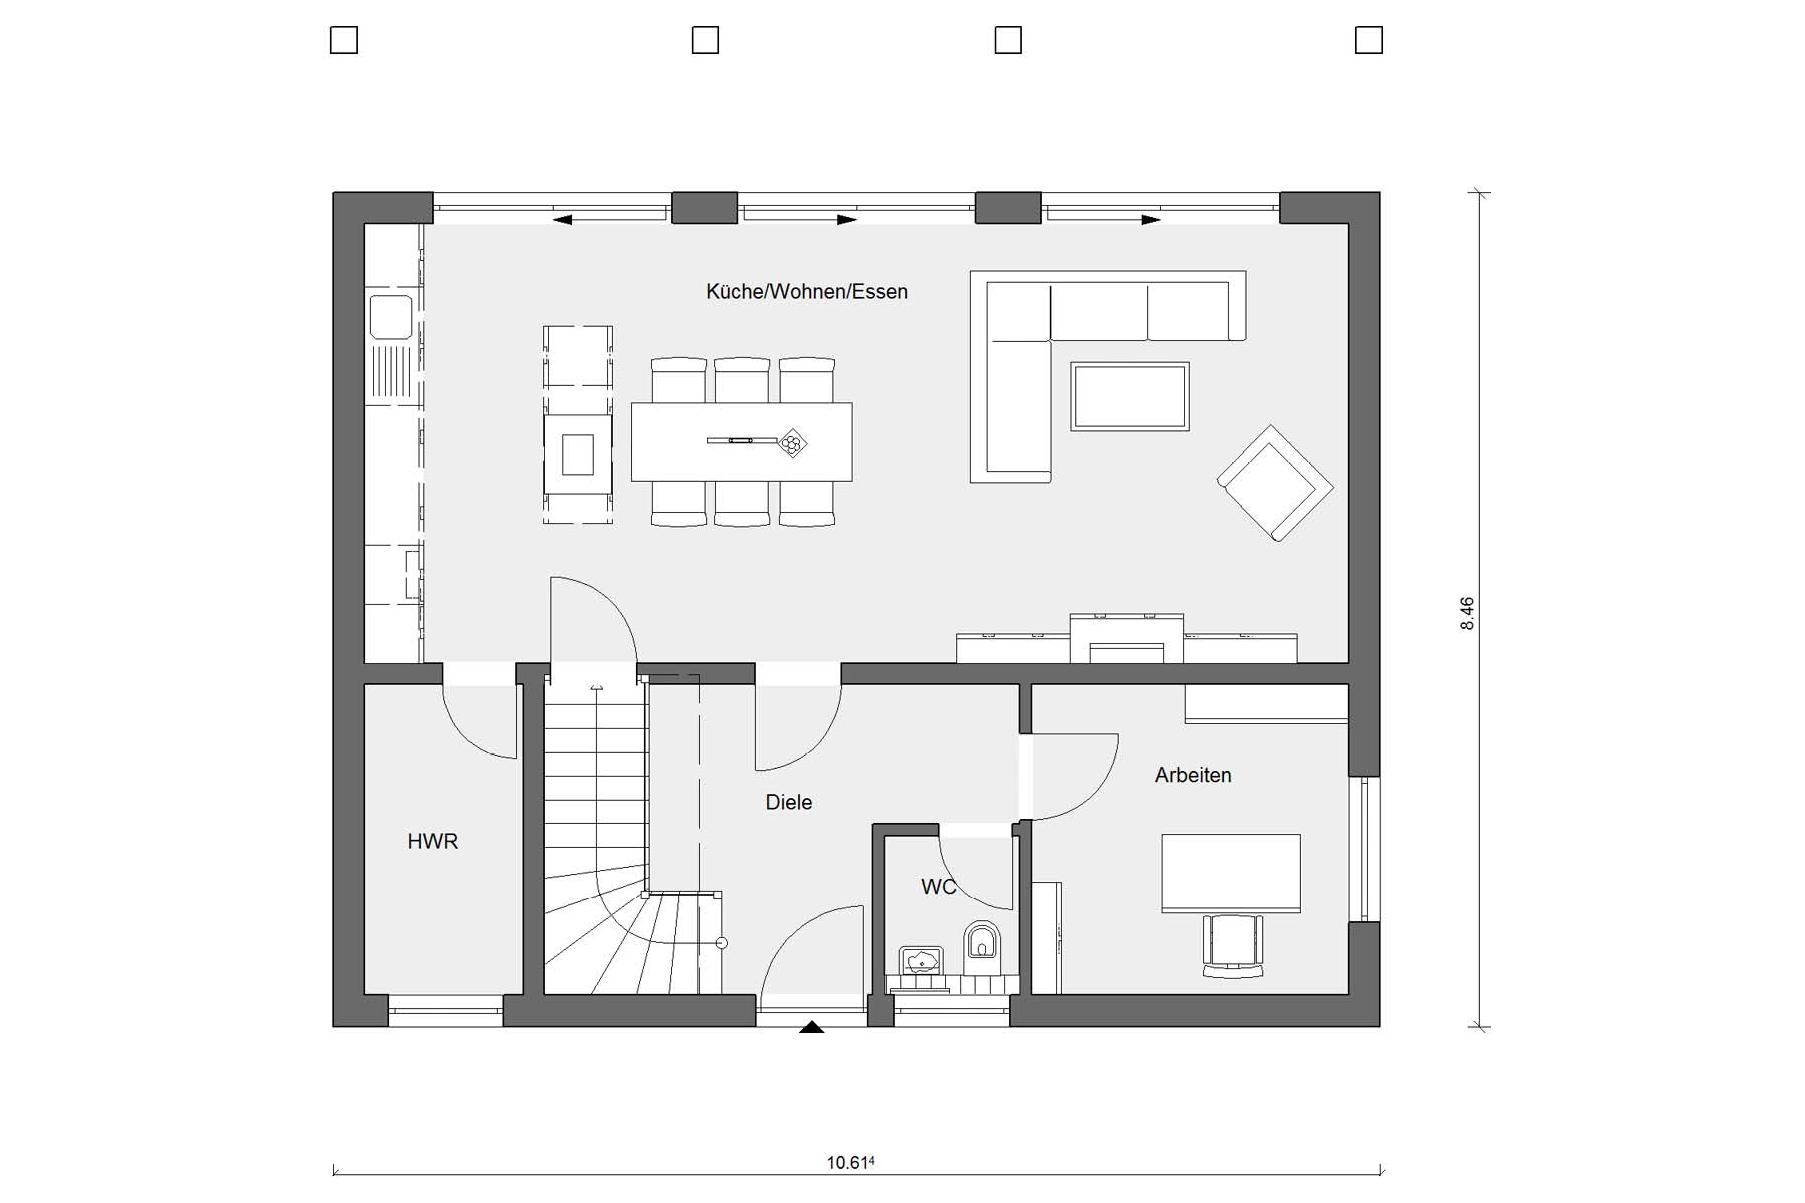 Ground floor plan E 20-147.3 House with cantilevered flat roof